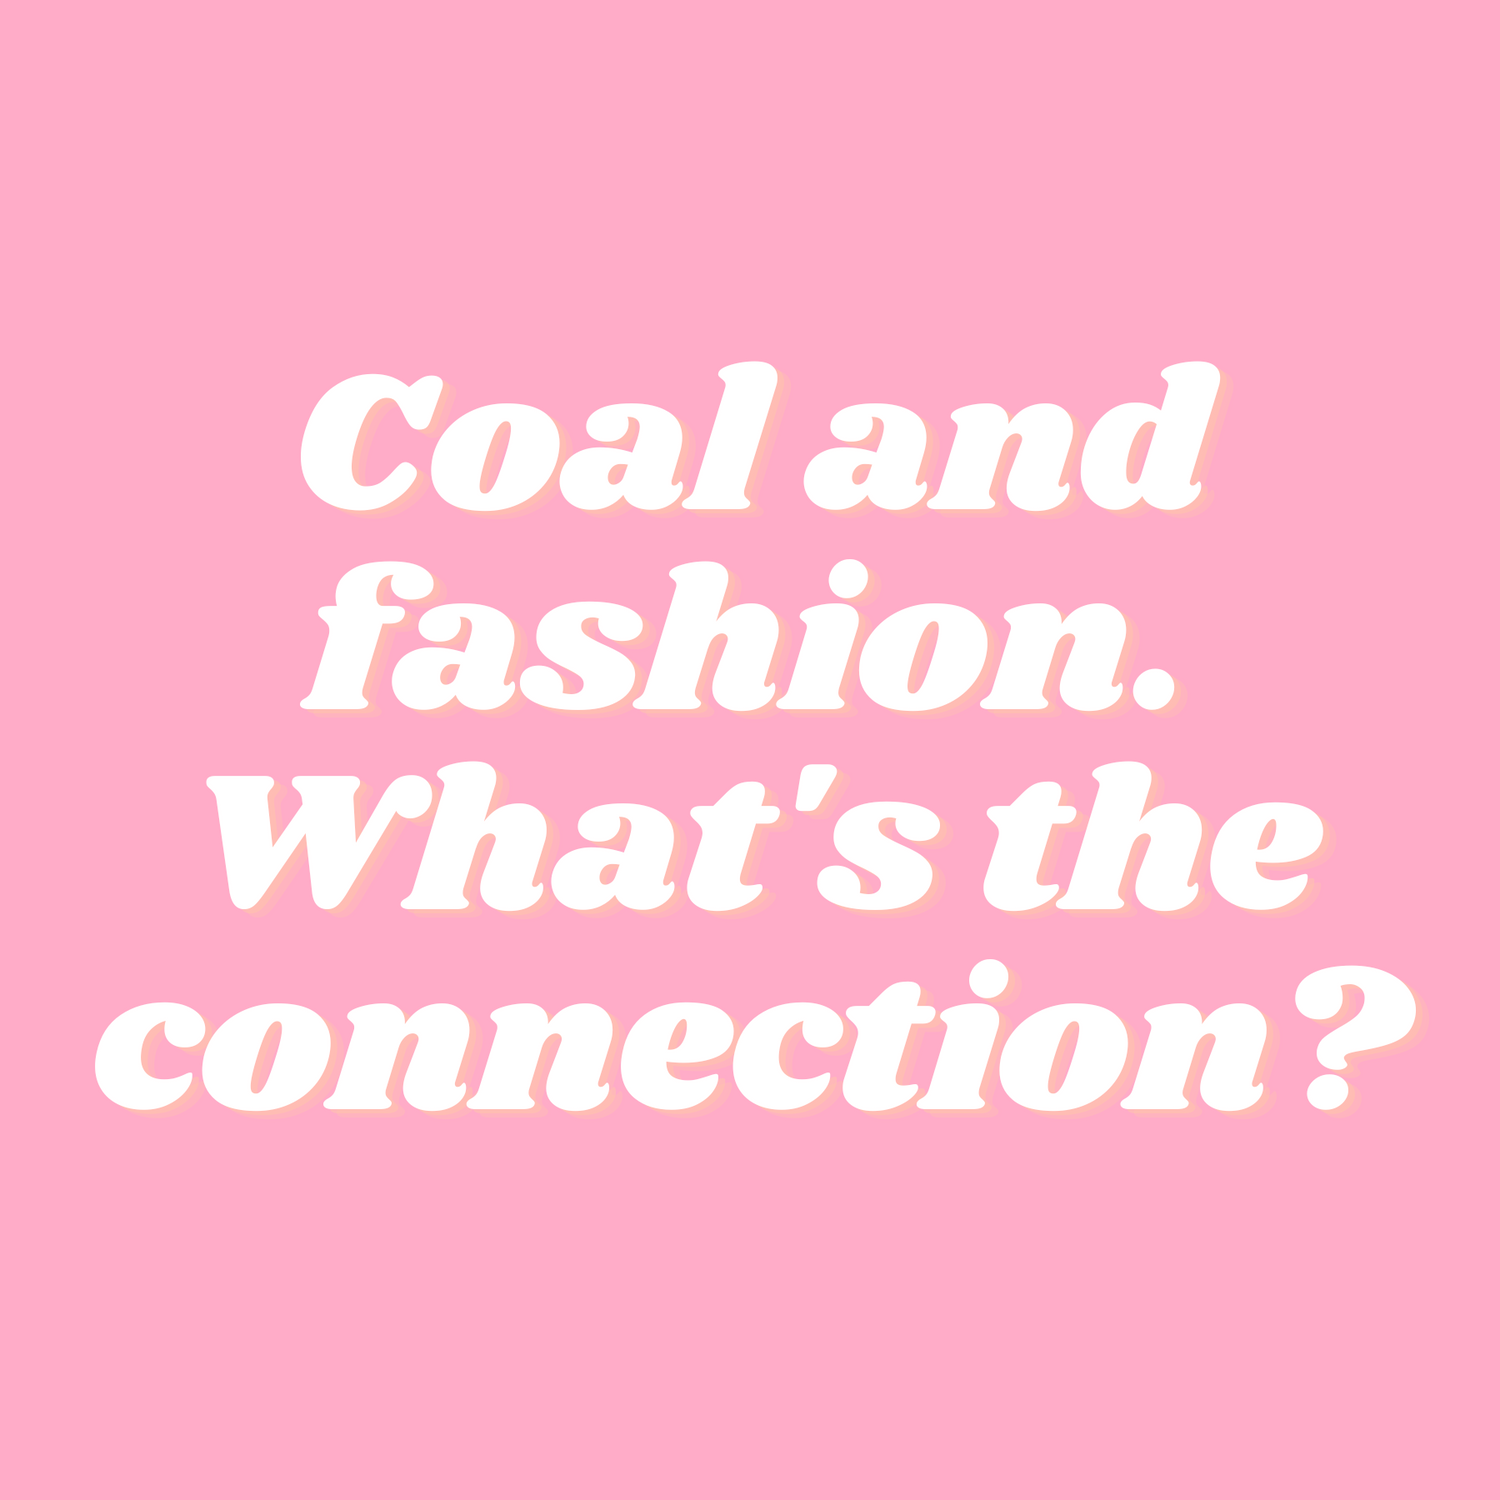 Coal and fashion. What’s the connection and why is it so bad?